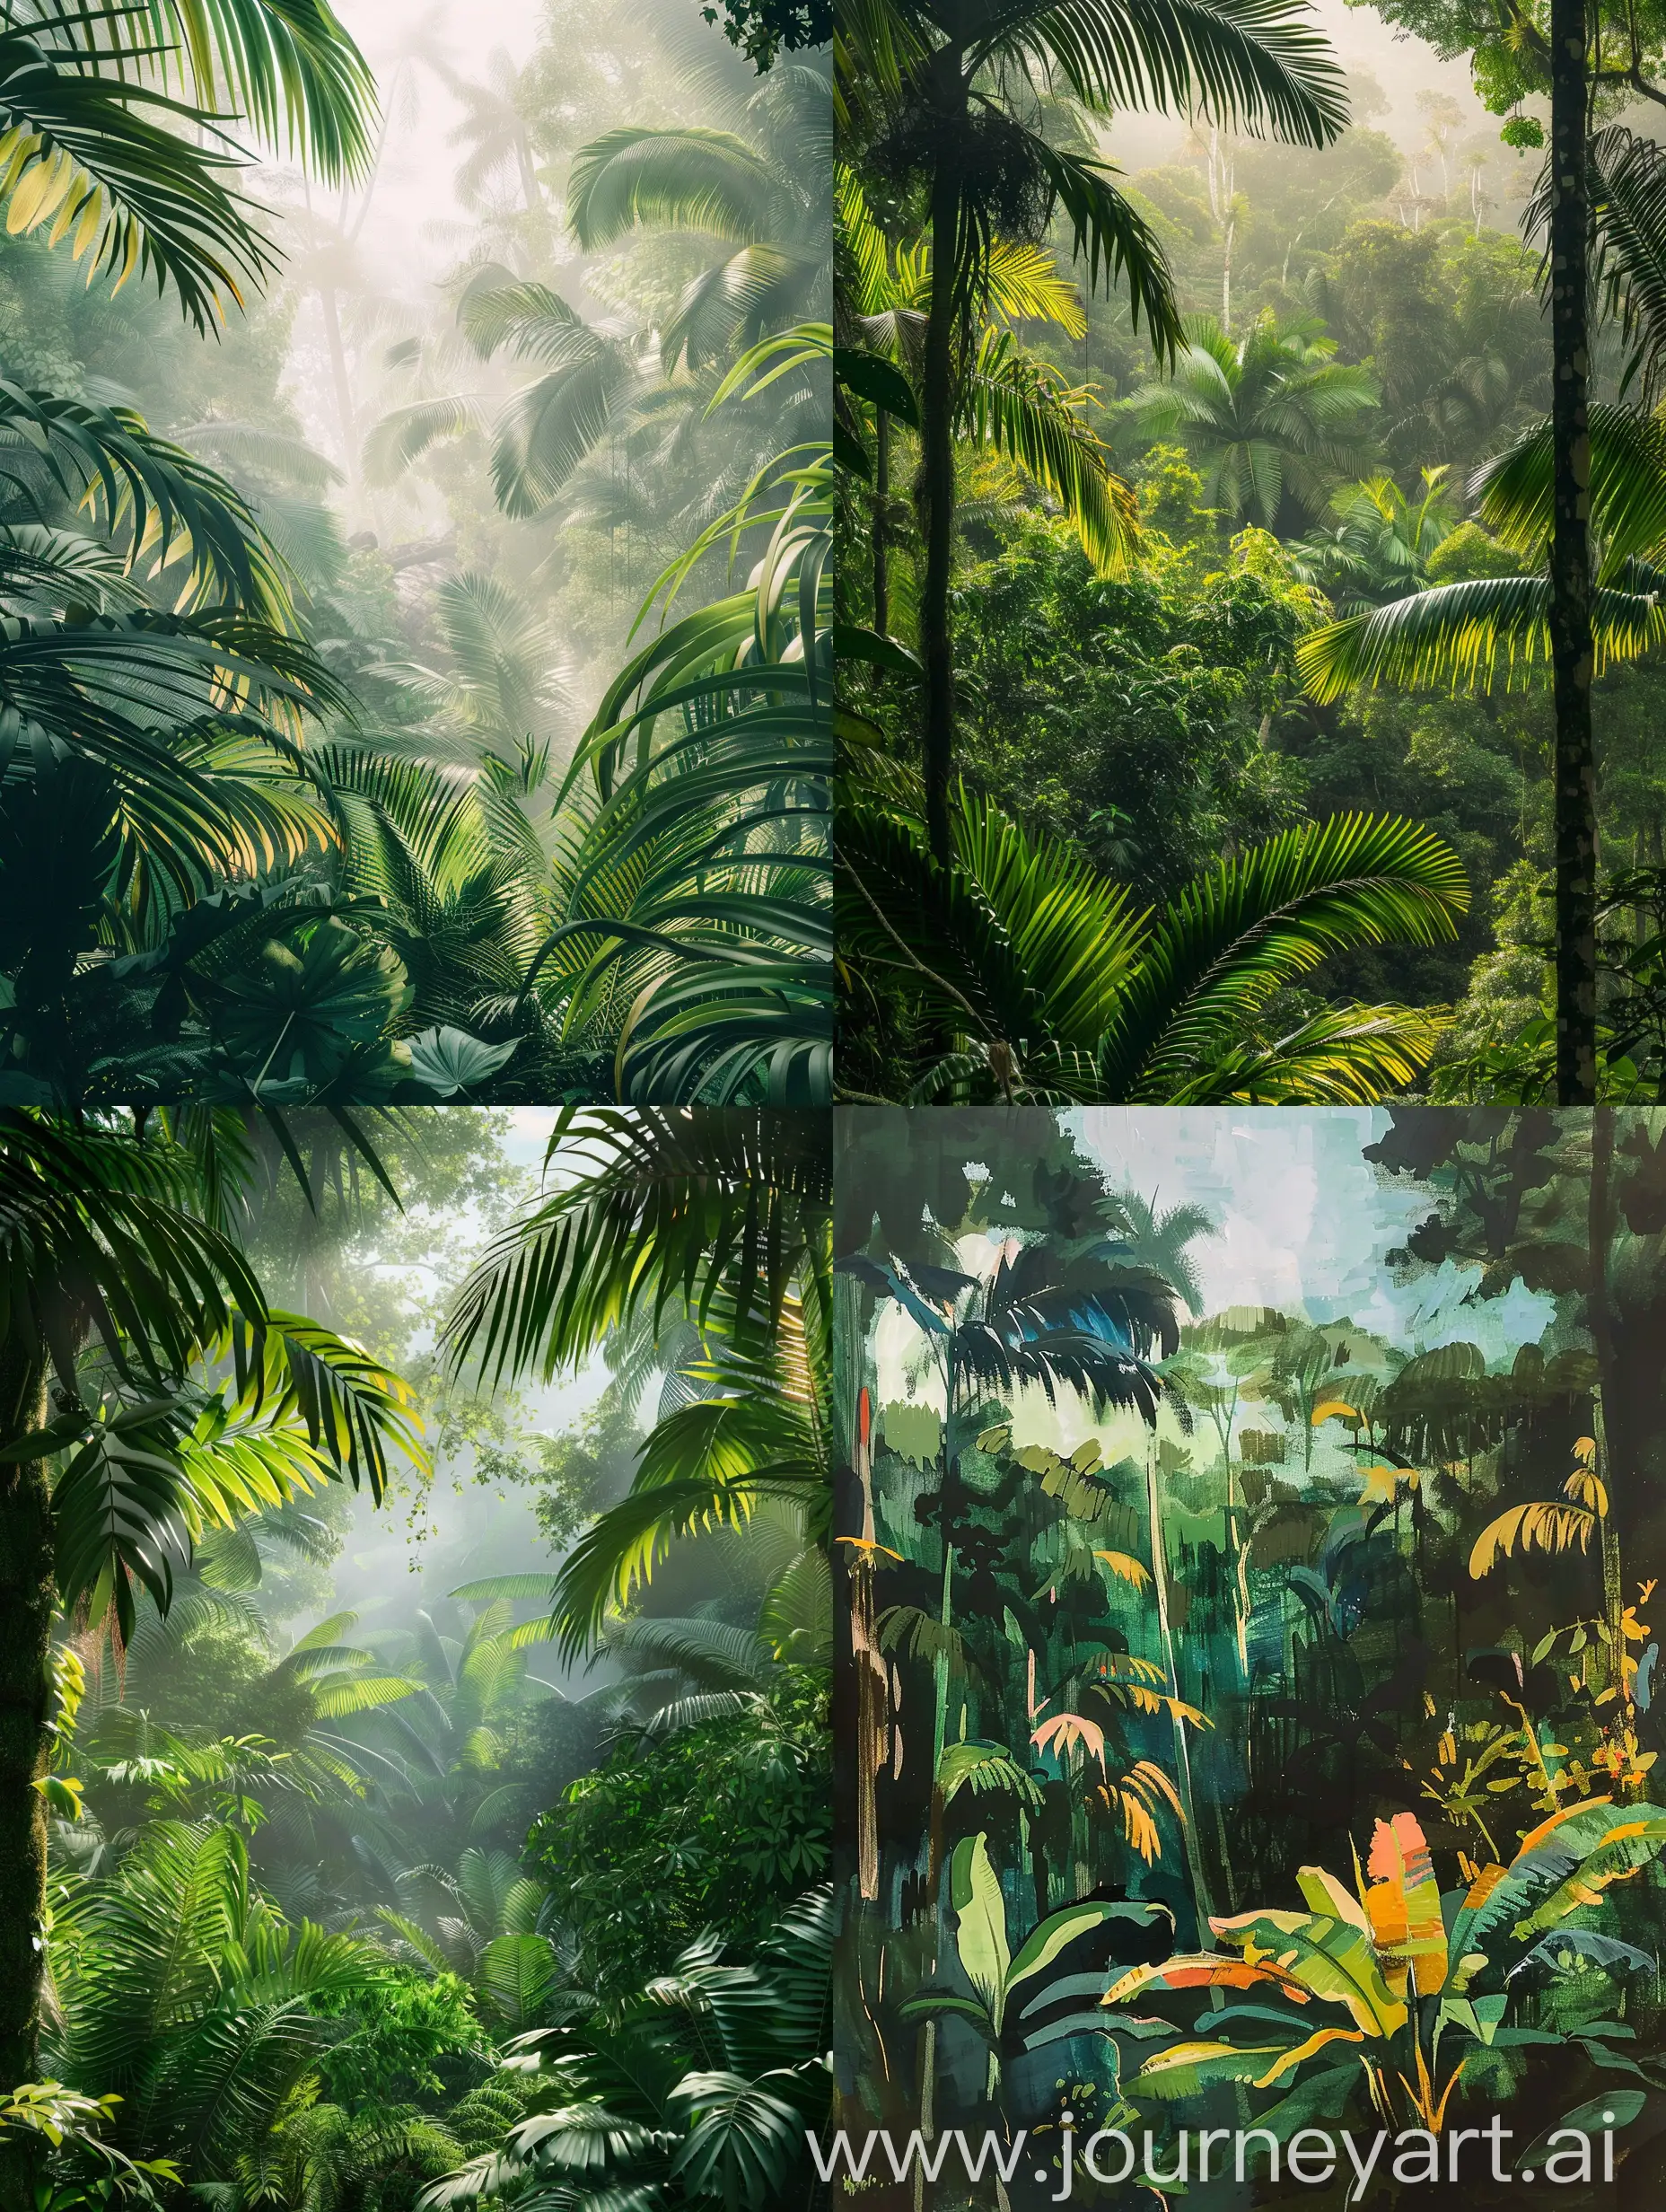 Vibrant-Tropical-Forest-Landscape-with-Lush-Greenery